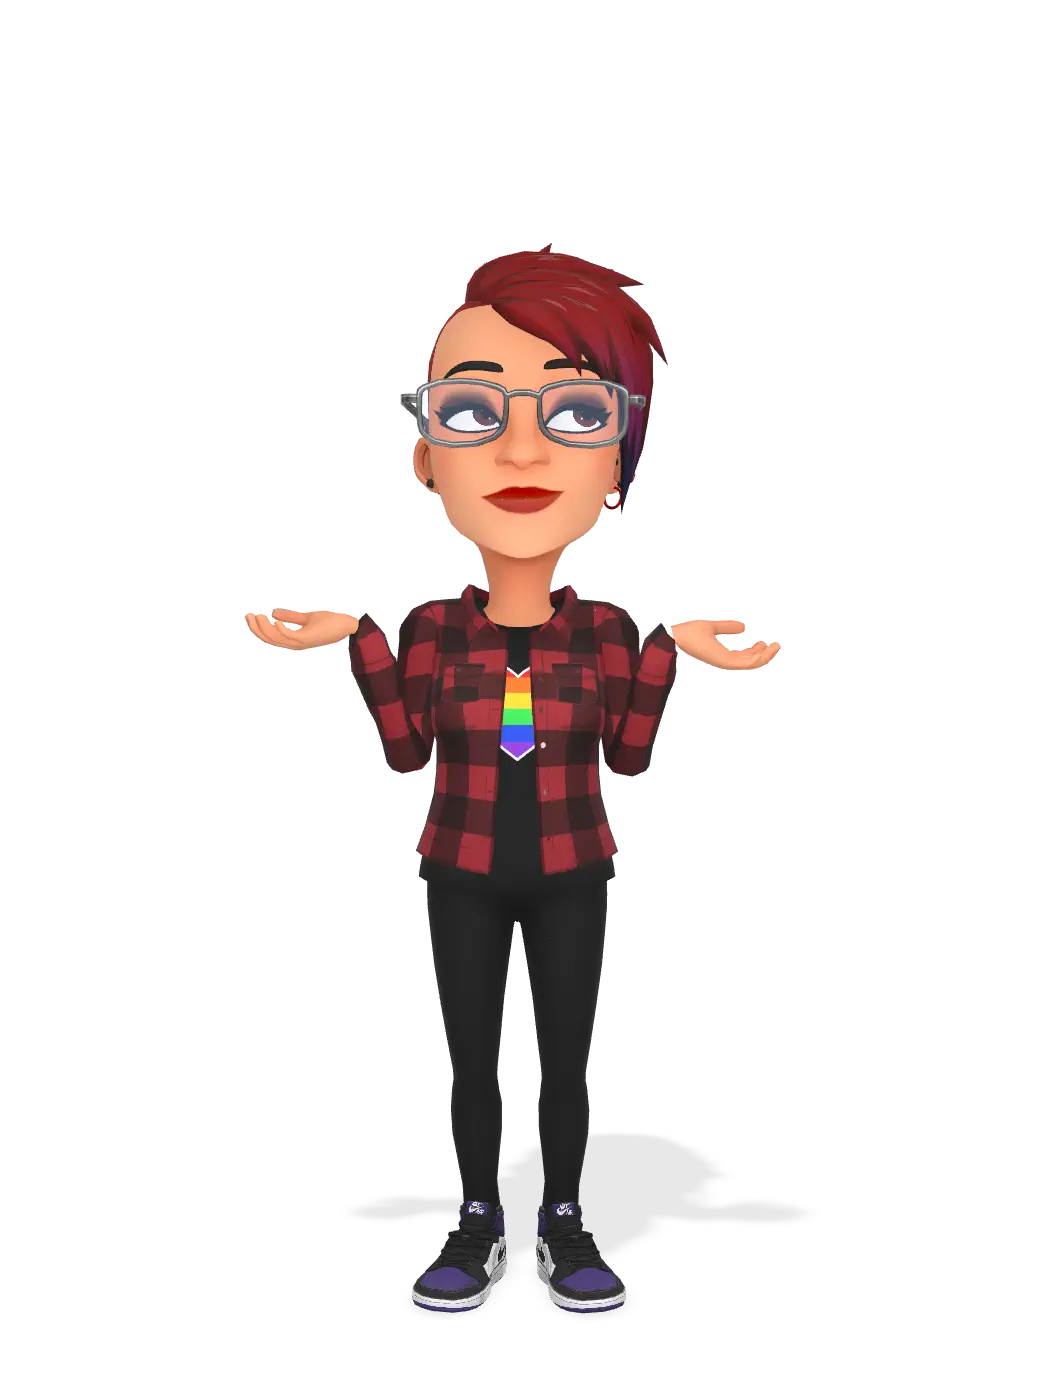 3D Bitmoji for thereppe